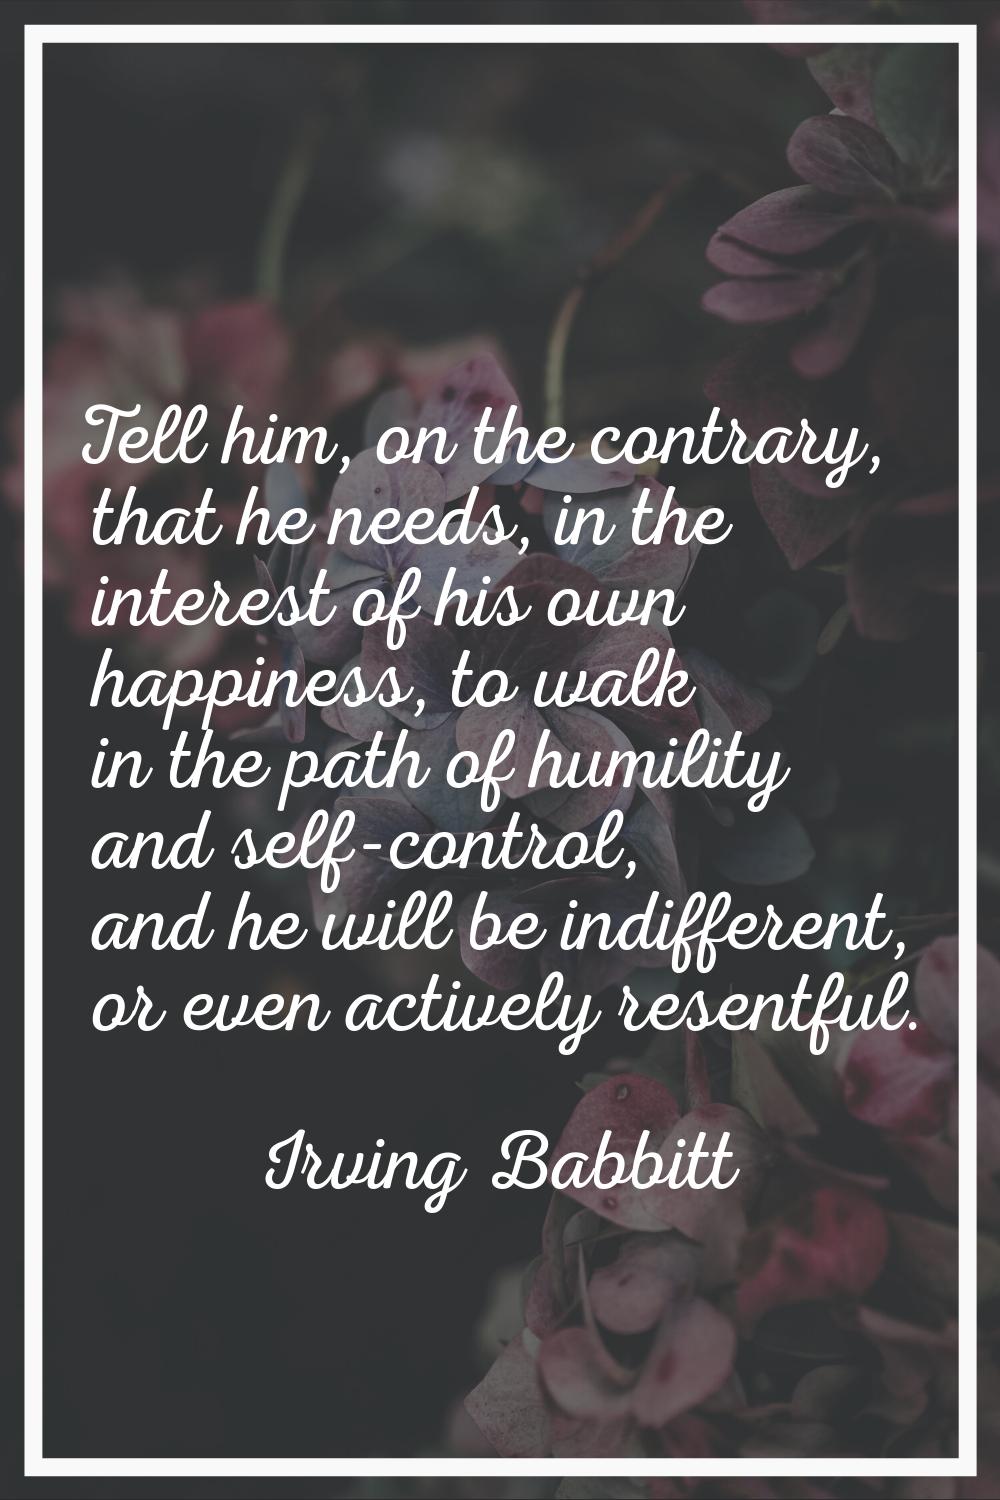 Tell him, on the contrary, that he needs, in the interest of his own happiness, to walk in the path